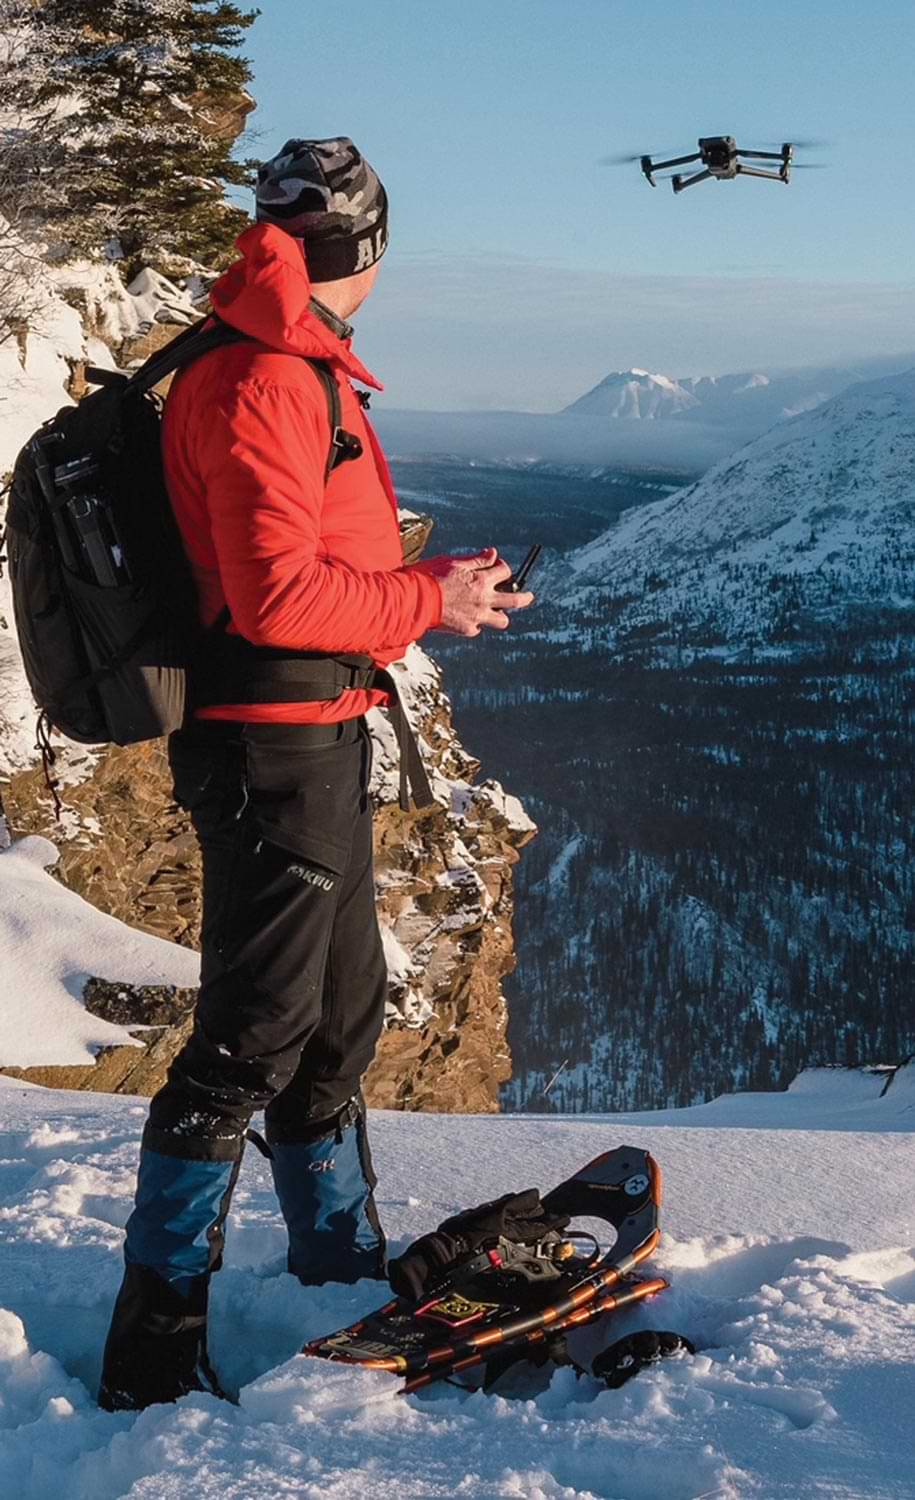 a man dressed in snowboarding gear operates a drone from a snowy mountain ledge